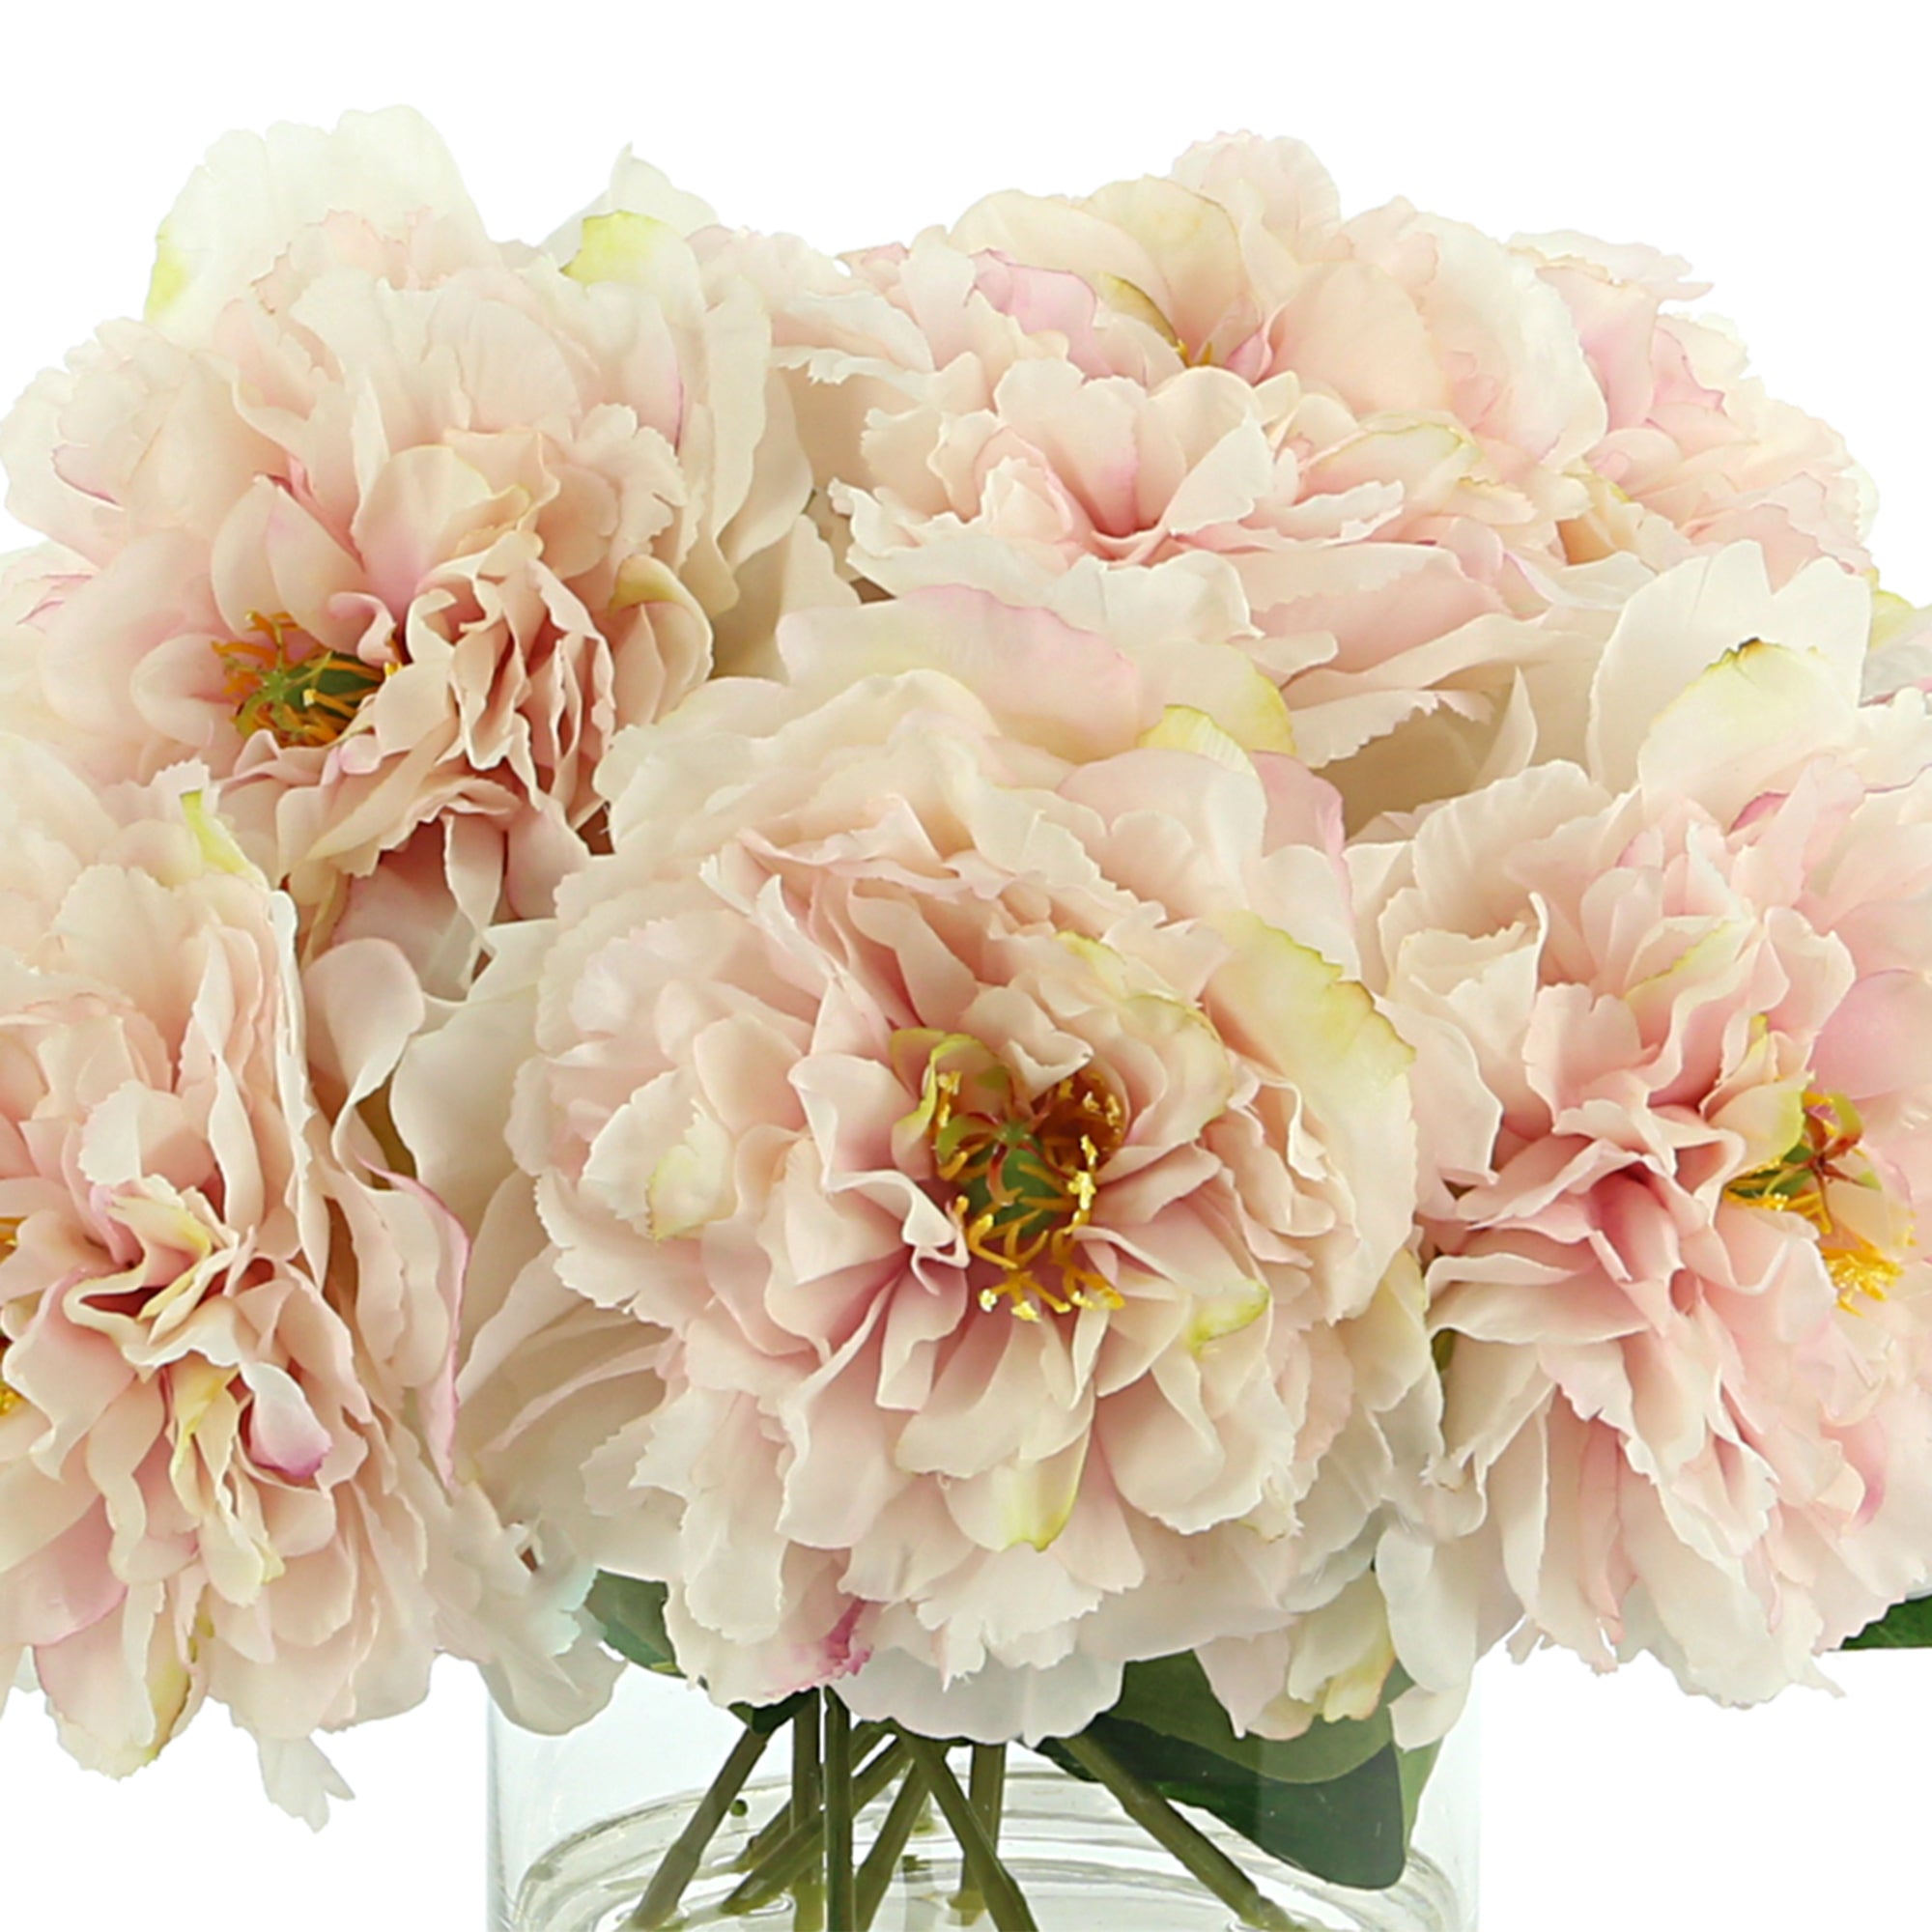 Peonies in clear glass vase